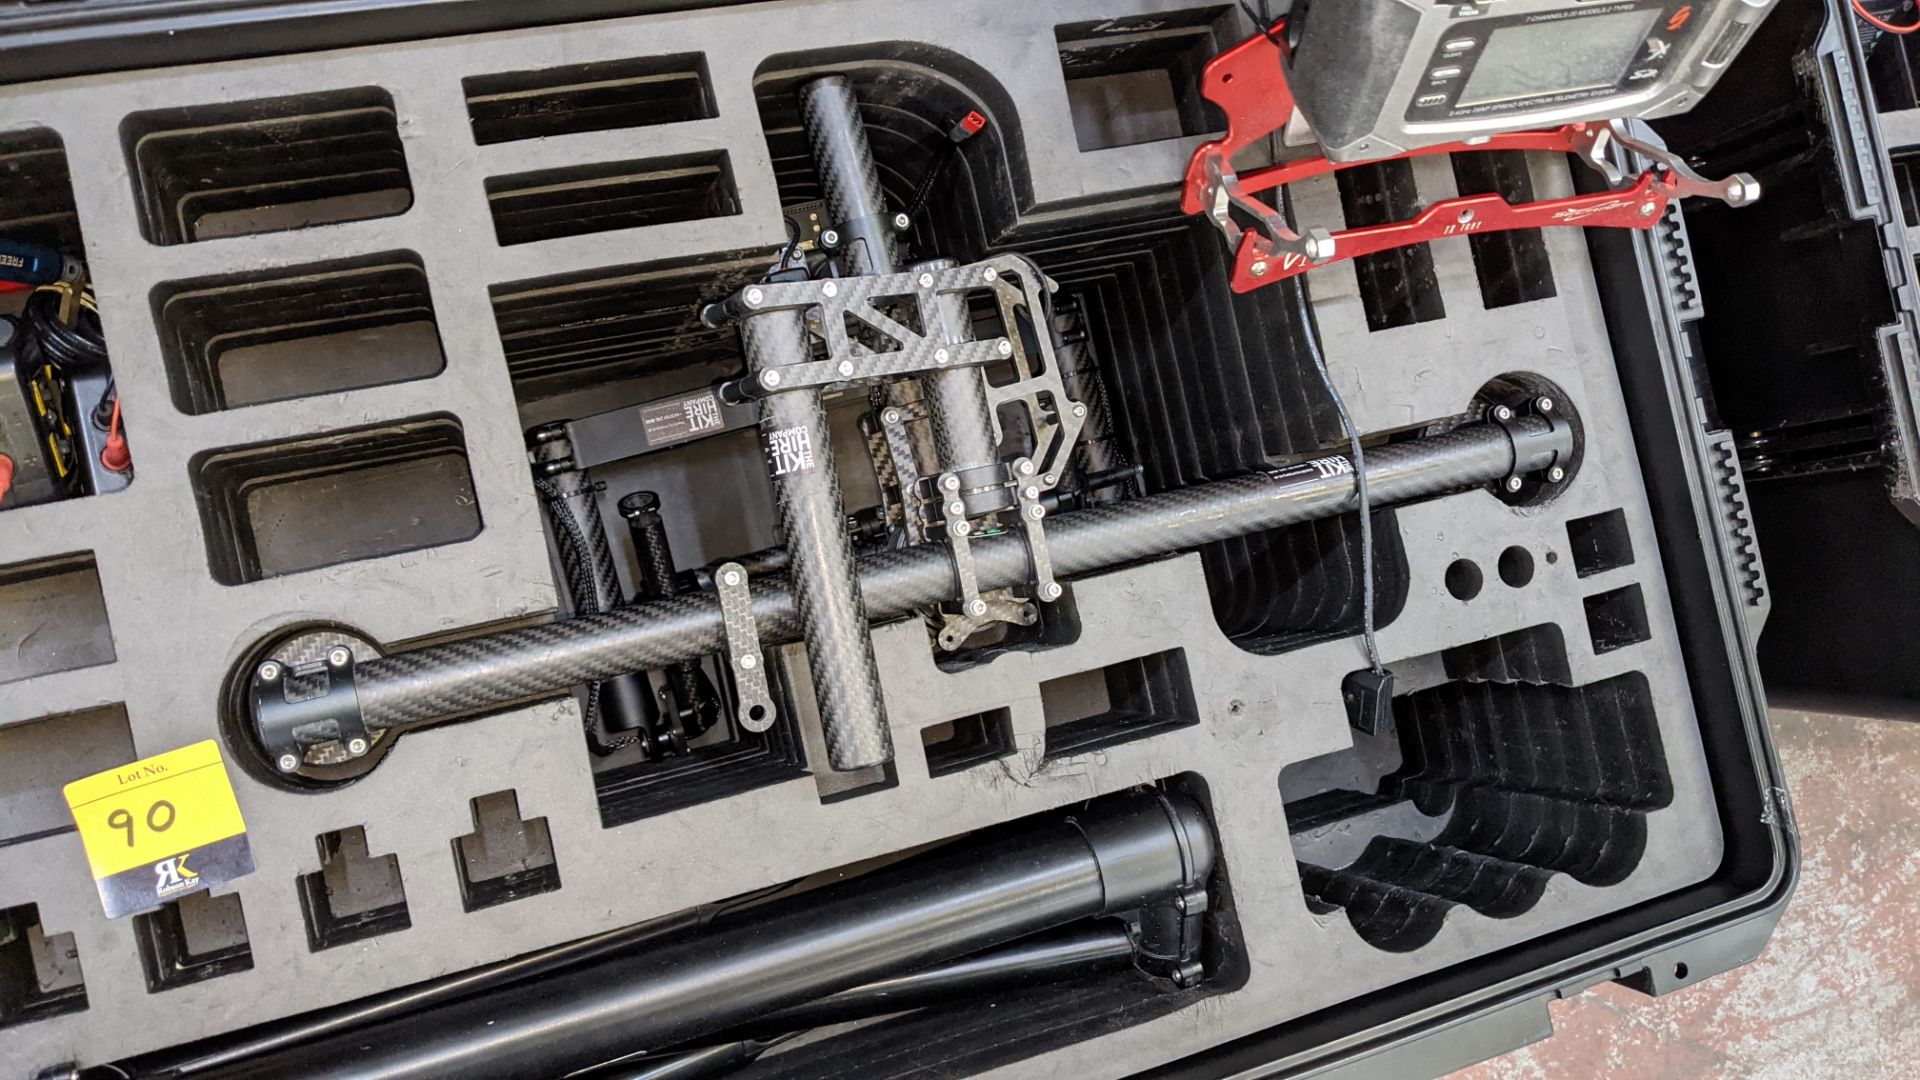 Freefly Movi M10 gimbal system with remote control including large case designed by Cinema Oxide - Image 9 of 15